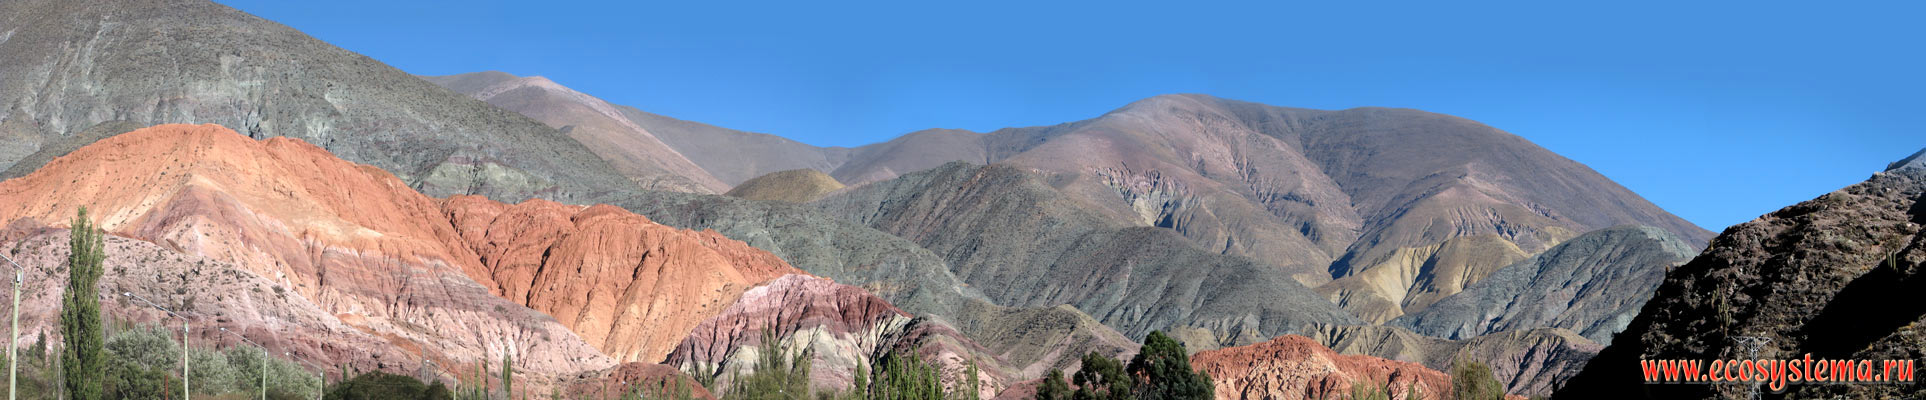 The panorama of Mountain Of Seven Colours (Cerro de los Siete Colores). Eastern slope of the Andes Highlands.
1200 m above sea level. Precordillera, Purmamarca, Jujuy Province, Northwest Argentina